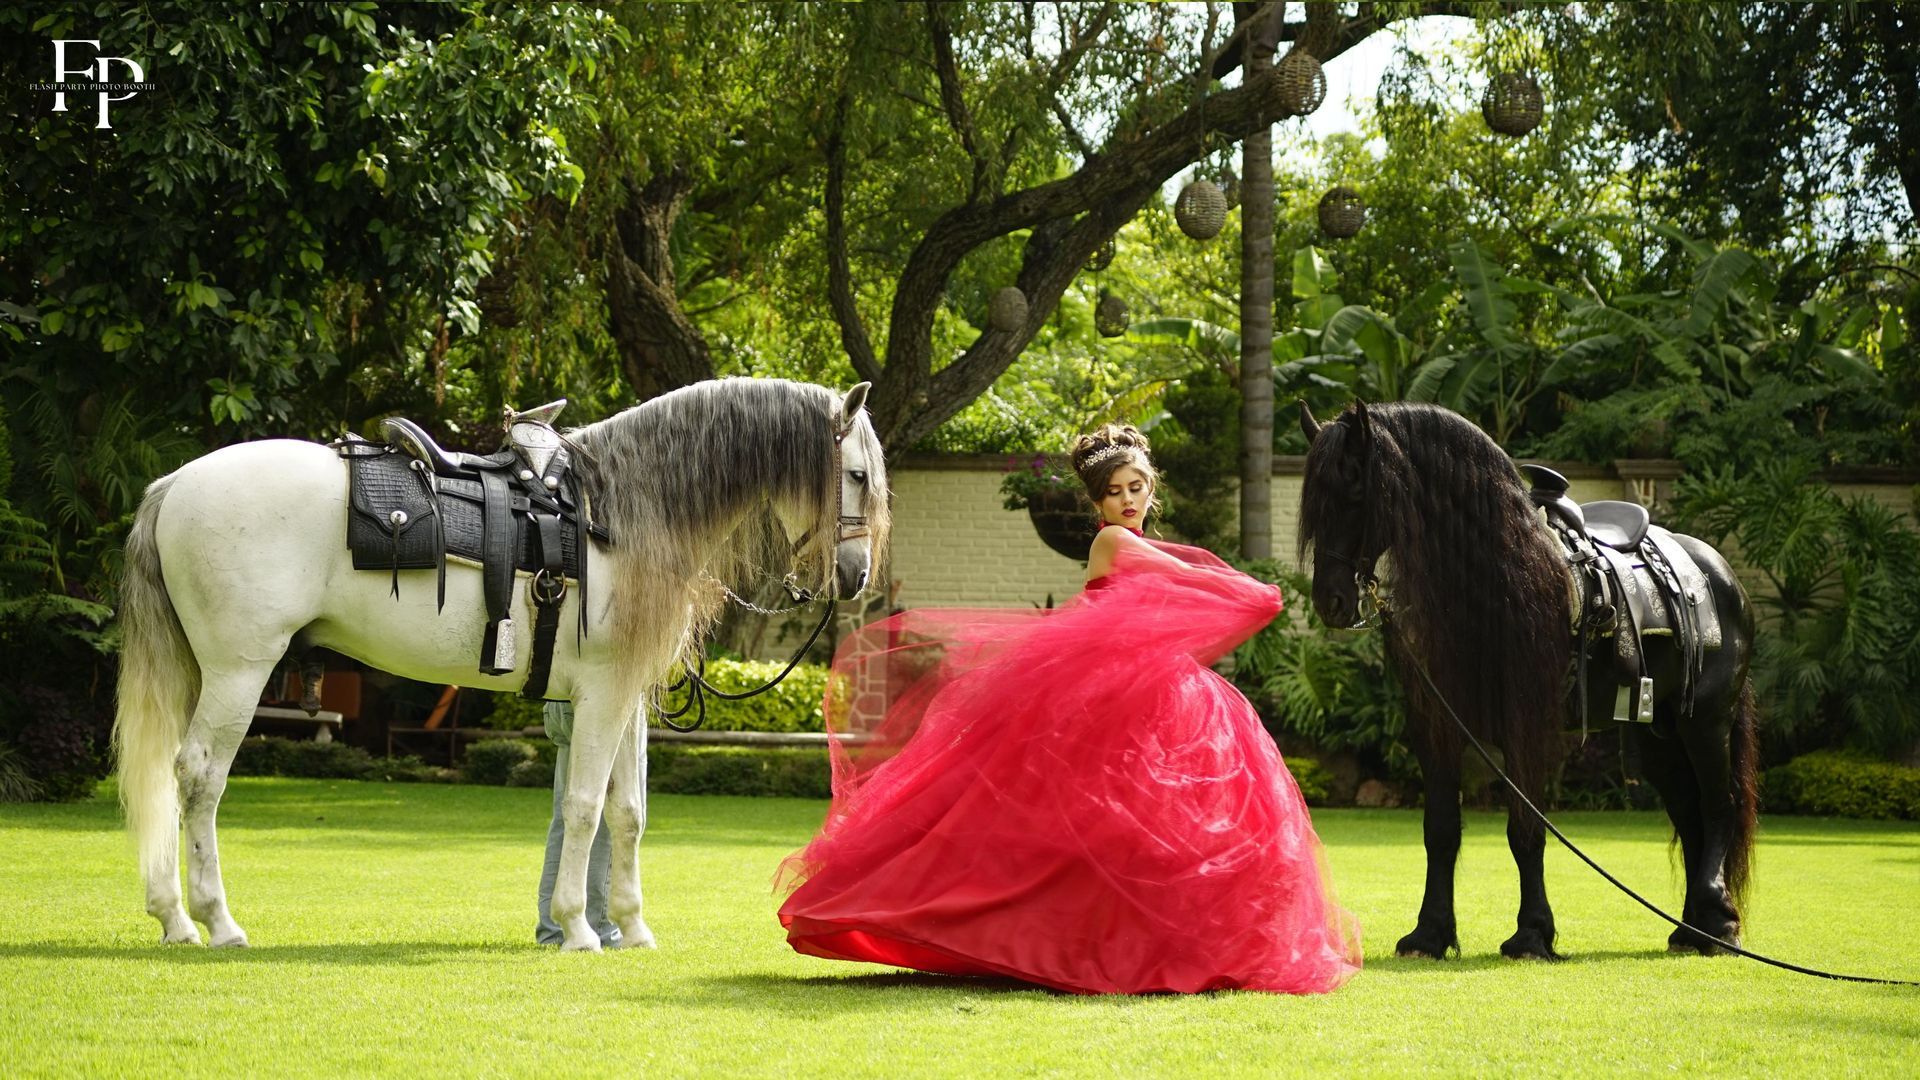 The Quinceañera enjoys a dance with two majestic horses gracing the background in Waco, Texas.